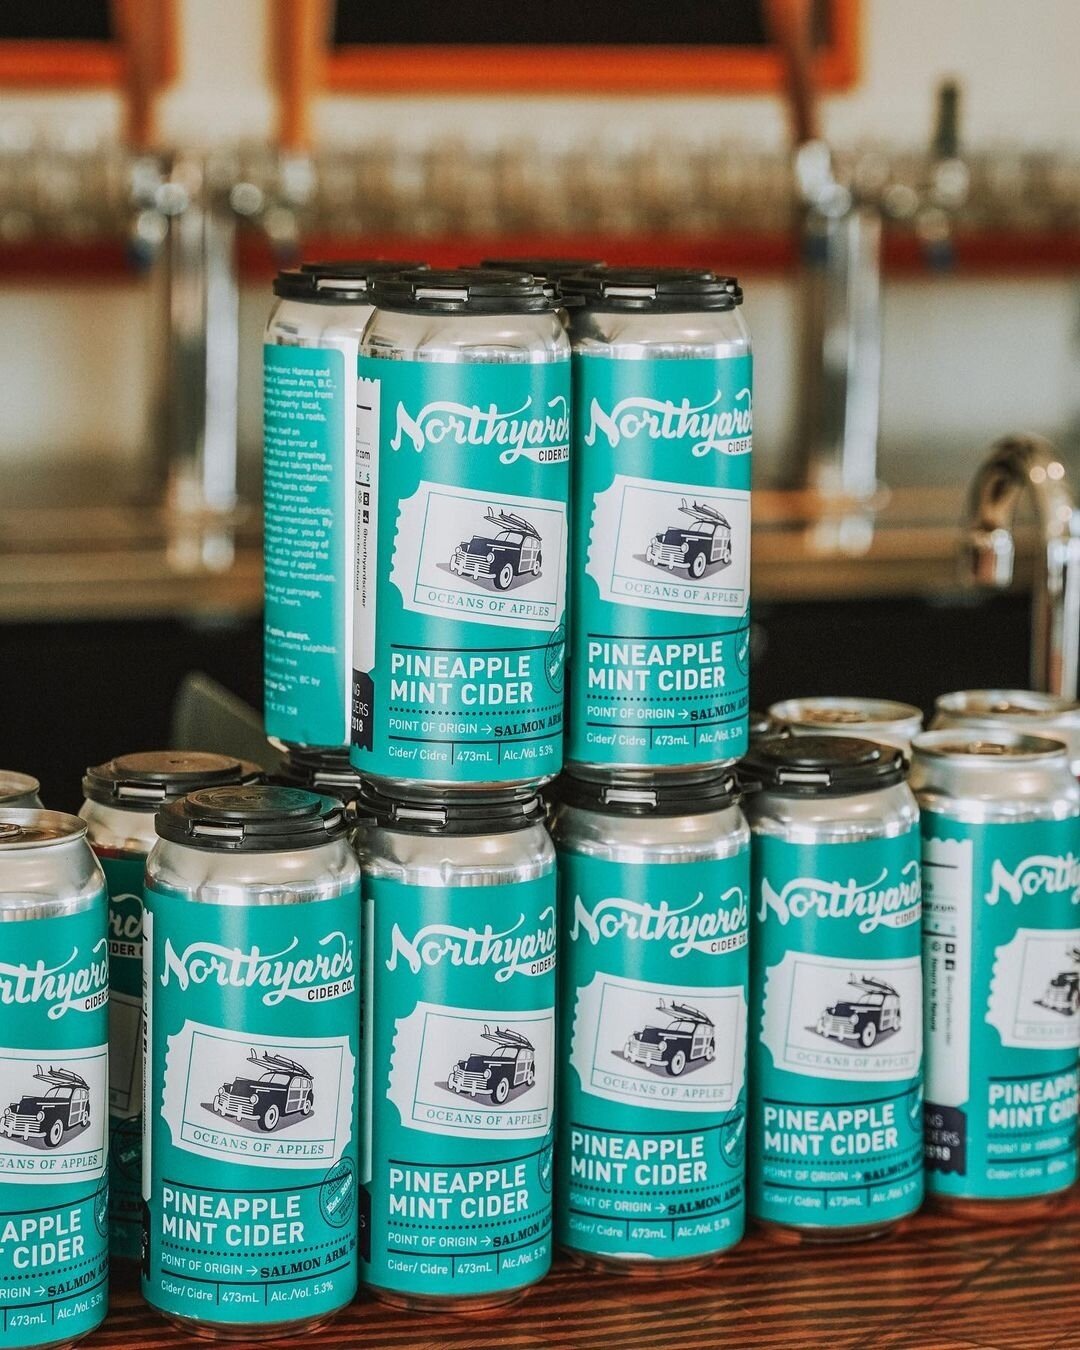 Northyards Cider Co. has done it again with their Pineapple Mint Cider! 🍍🍃

The perfect drink for a hot summer day, this cider is infused with pineapple and fresh mint leaves to give it a refreshingly sweet taste. The mint provides the cider with a